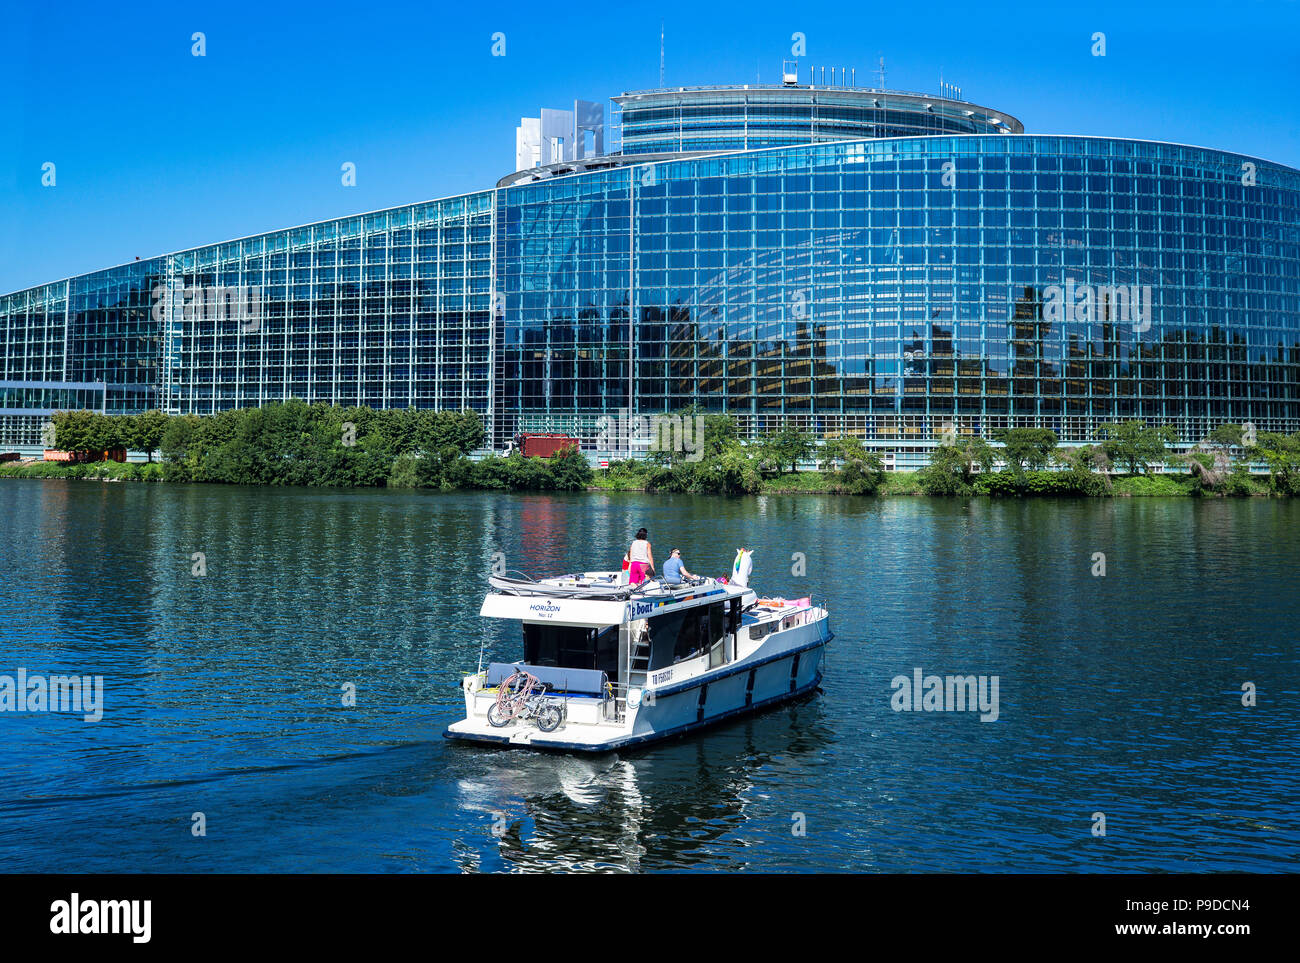 Strasbourg, pleasure boat cruising on Ill river, Louise Weiss building, EU, European Parliament, Alsace, France, Europe, Stock Photo